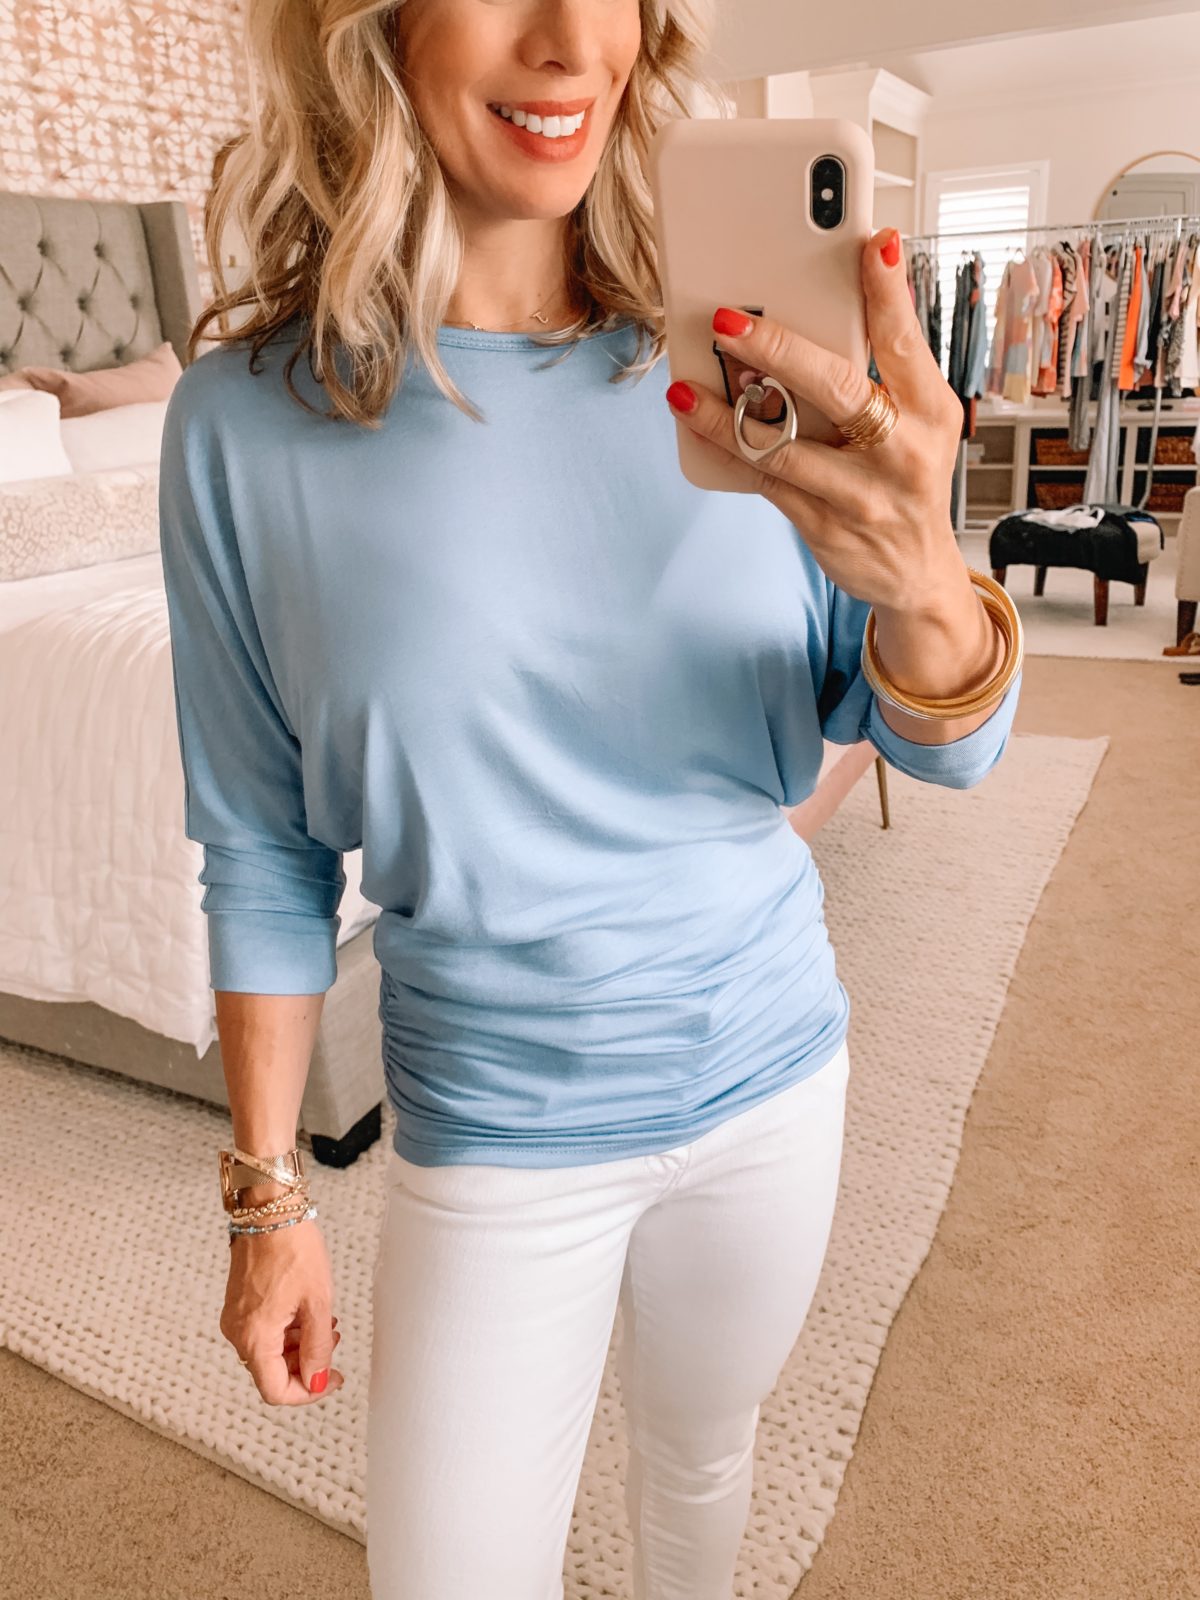 Amazon Fashion Finds, Blue Ruched Waist Top, Jeans